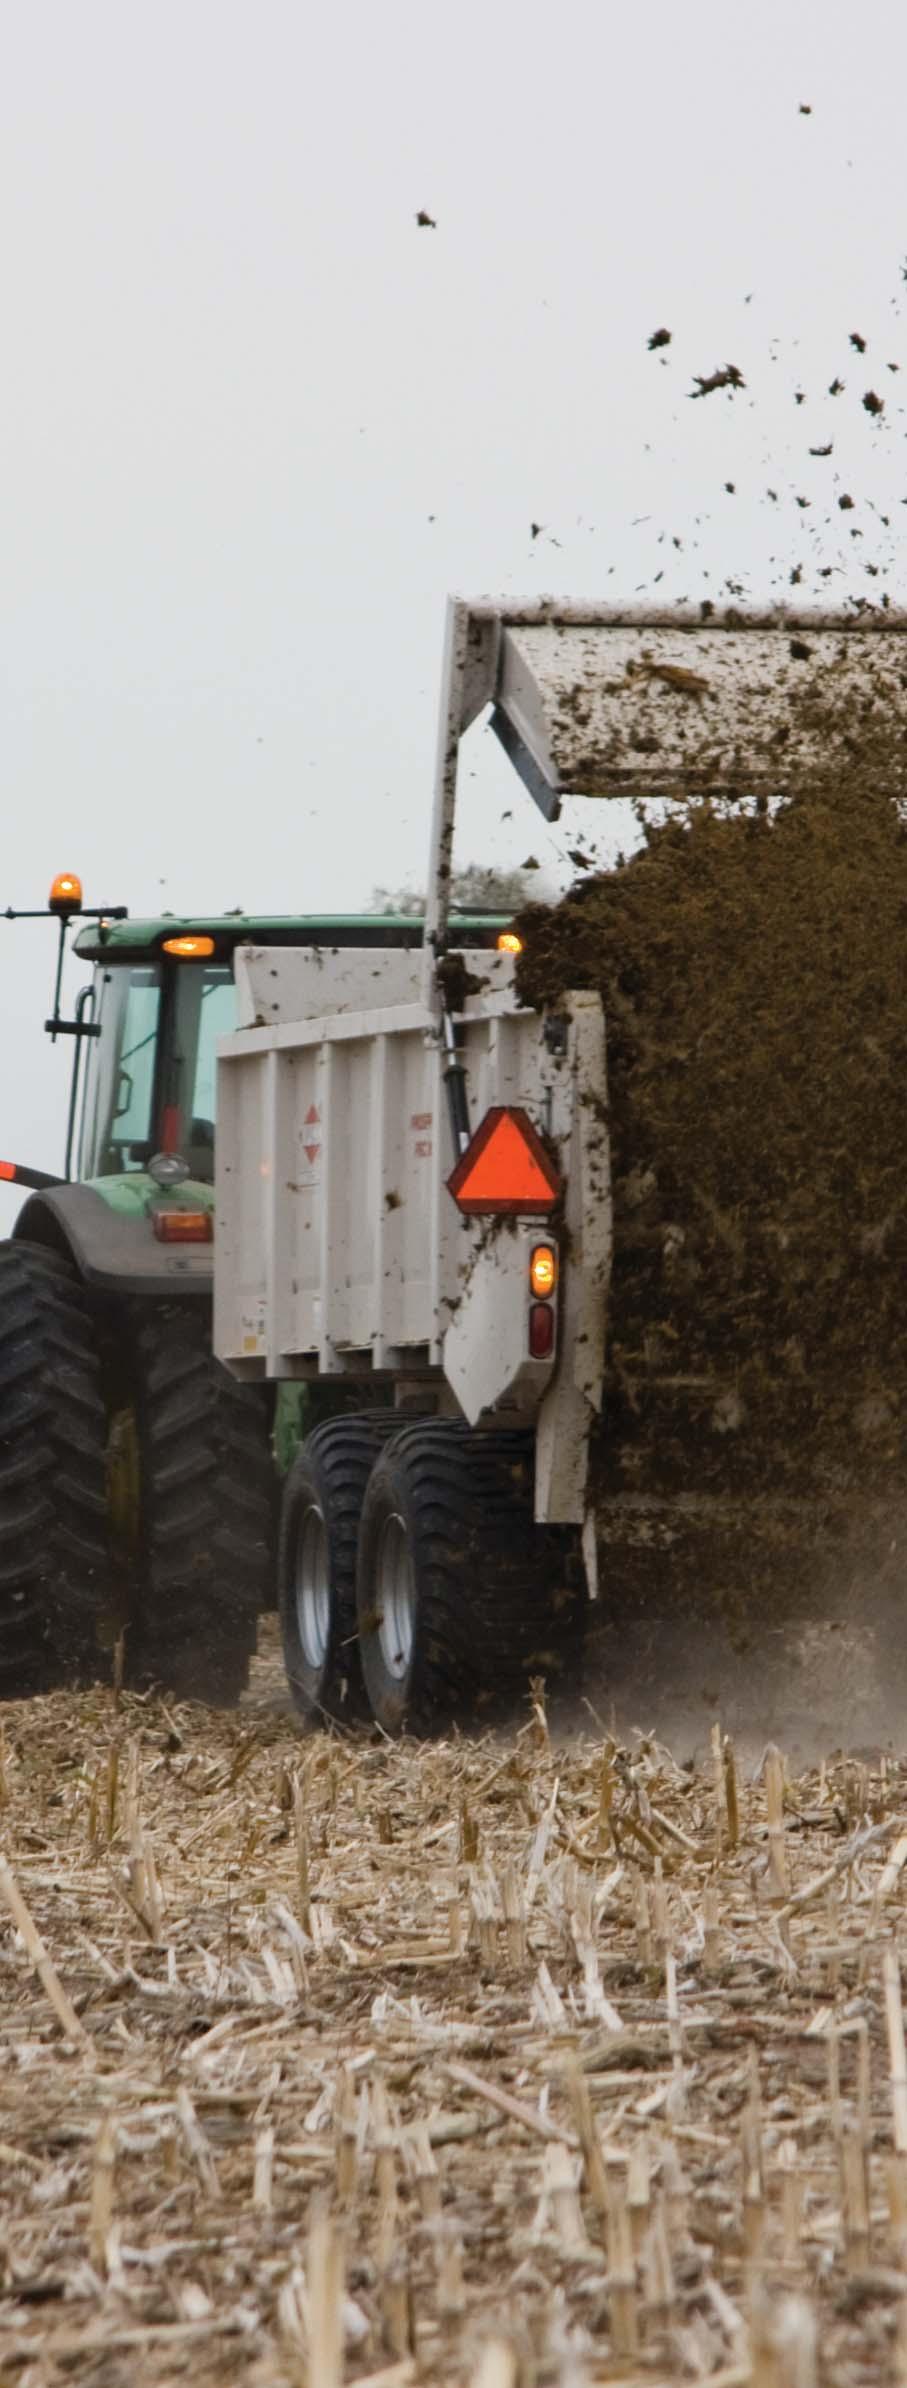 SPREADER SCALE SYSTEMS NT 460 / NT 8000i MAXIMIZE EFFICIENCY AND SPREADING PERFORMANCE MAKE YOUR MANURE GO FURTHER, REDUCE YOUR COSTS, AND PROTECT YOUR OPERATION KUHN has partnered with Digi-Star to